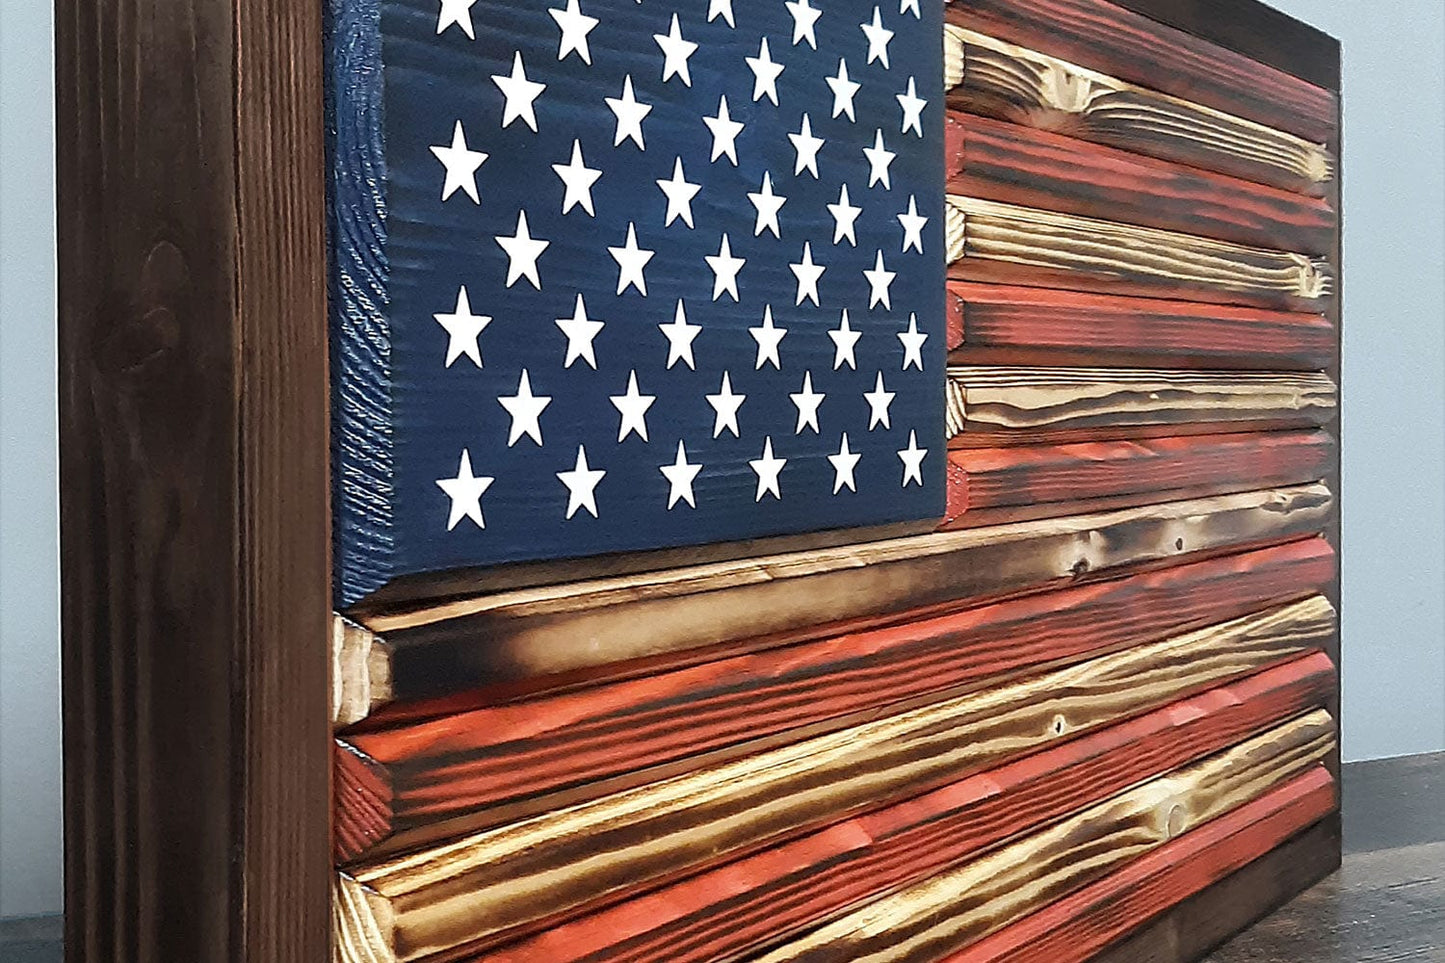 READY TO SHIP Framed Rustic Wooden American Flag, Handcrafted Woodworking by Eric